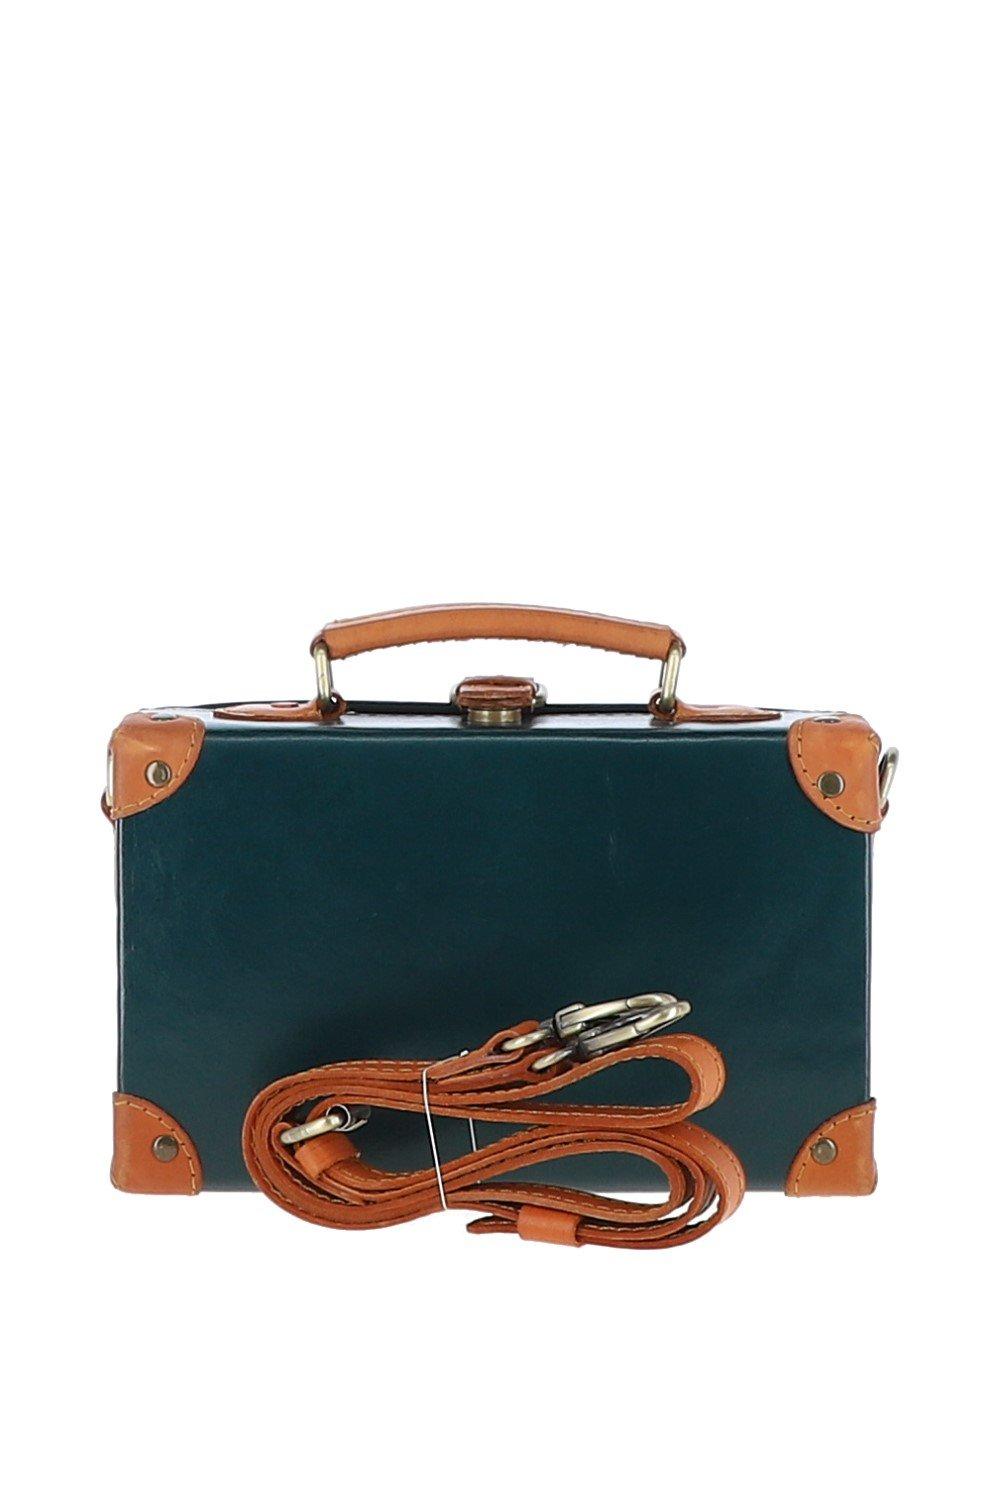 'Tramonto' Home Accessory Exquisite Leather Box